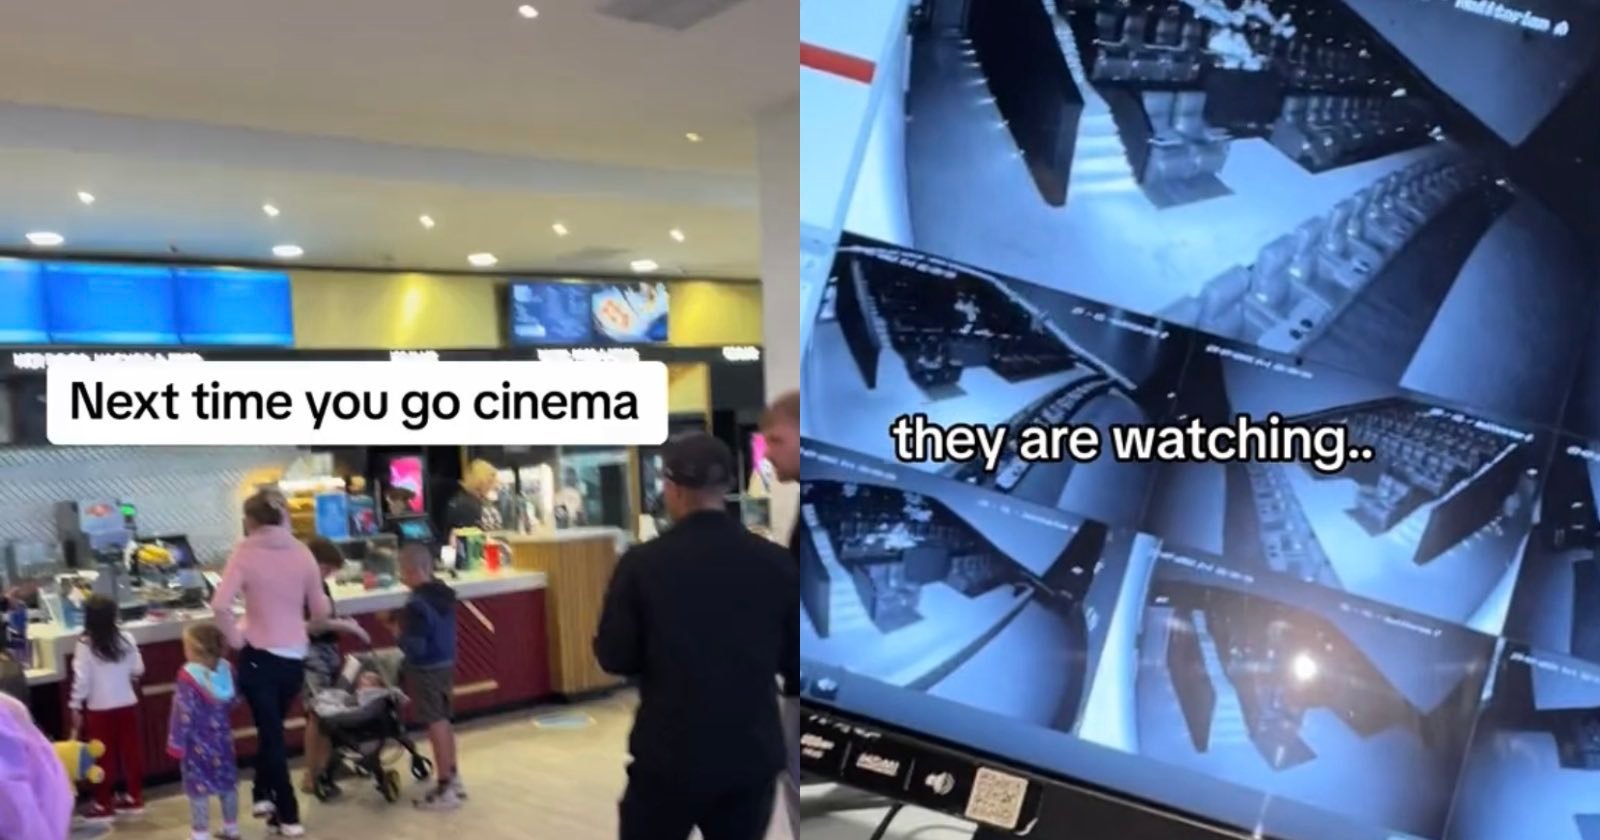  fan warns movie theater cameras are watching 